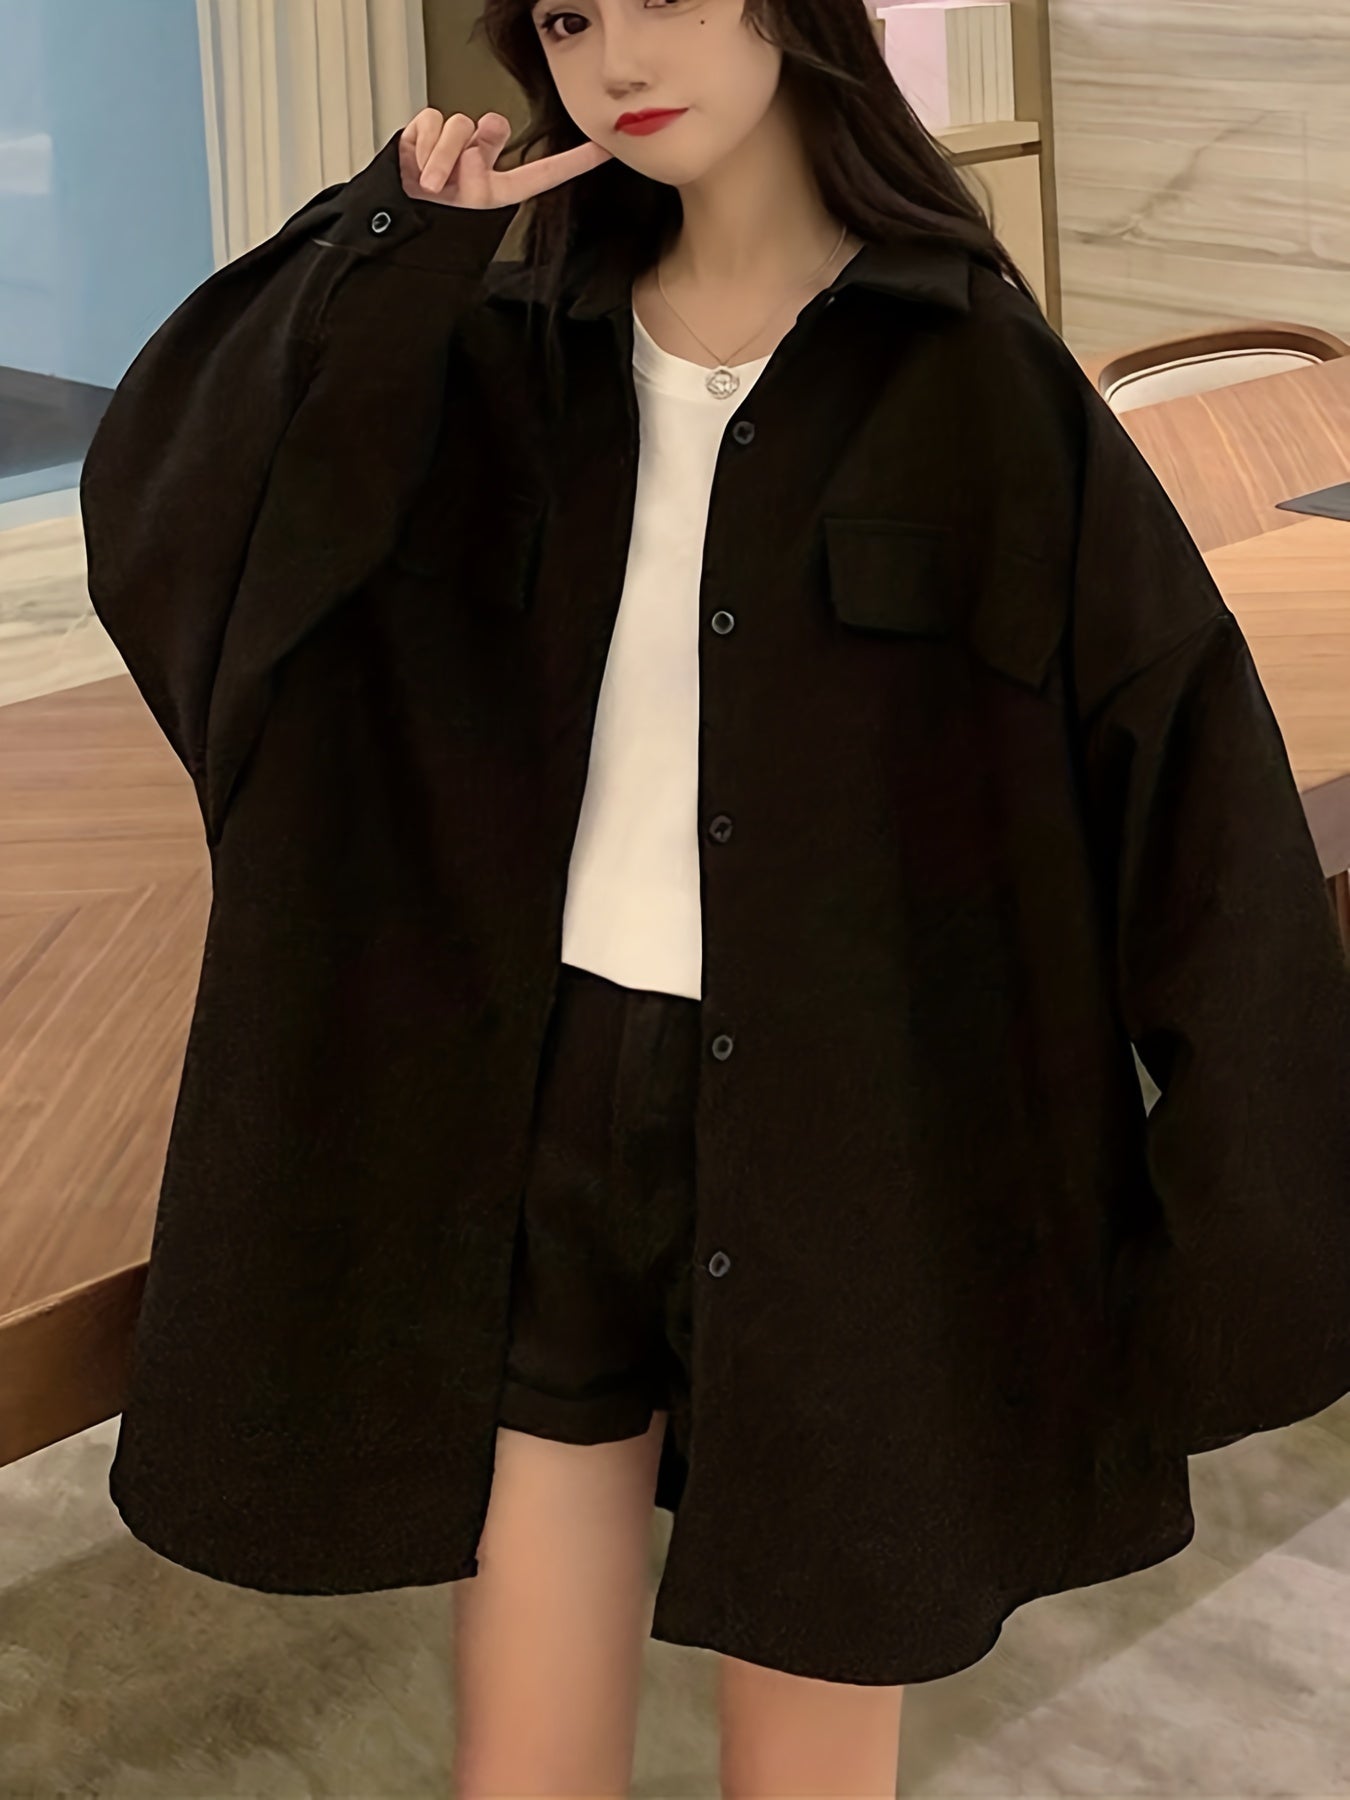 Antmvs Solid Oversized Shirt, Casual Button Front Long Sleeve Collared Shirt, Women's Clothing